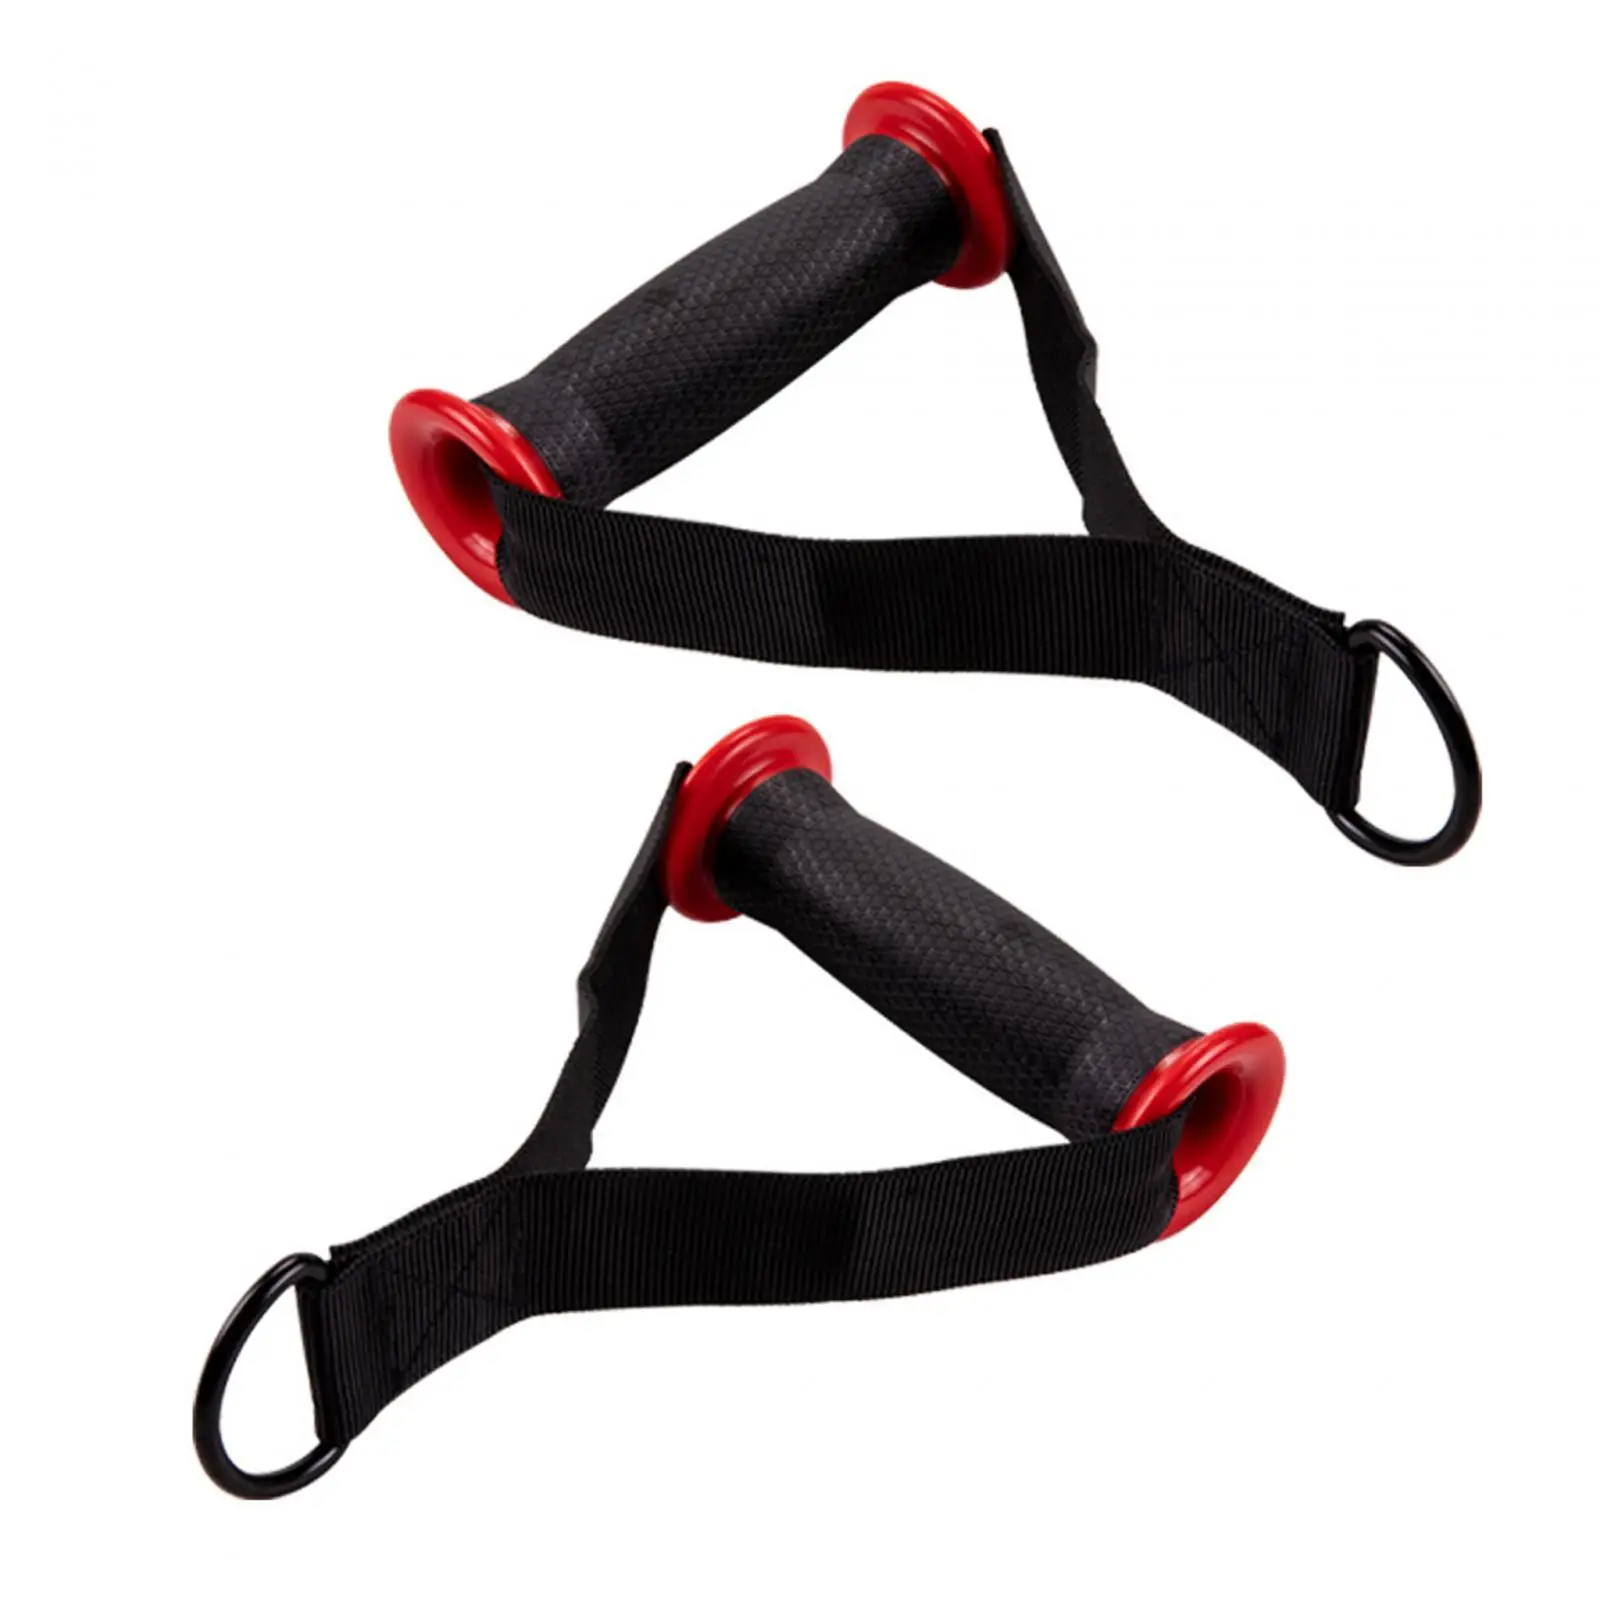 2 Pieces Gym Handle Push Pull Attachment Stirrup Gymnastics Hanging Heavy Duty Nylon Webbing Cable Attachment Pull Band Handles